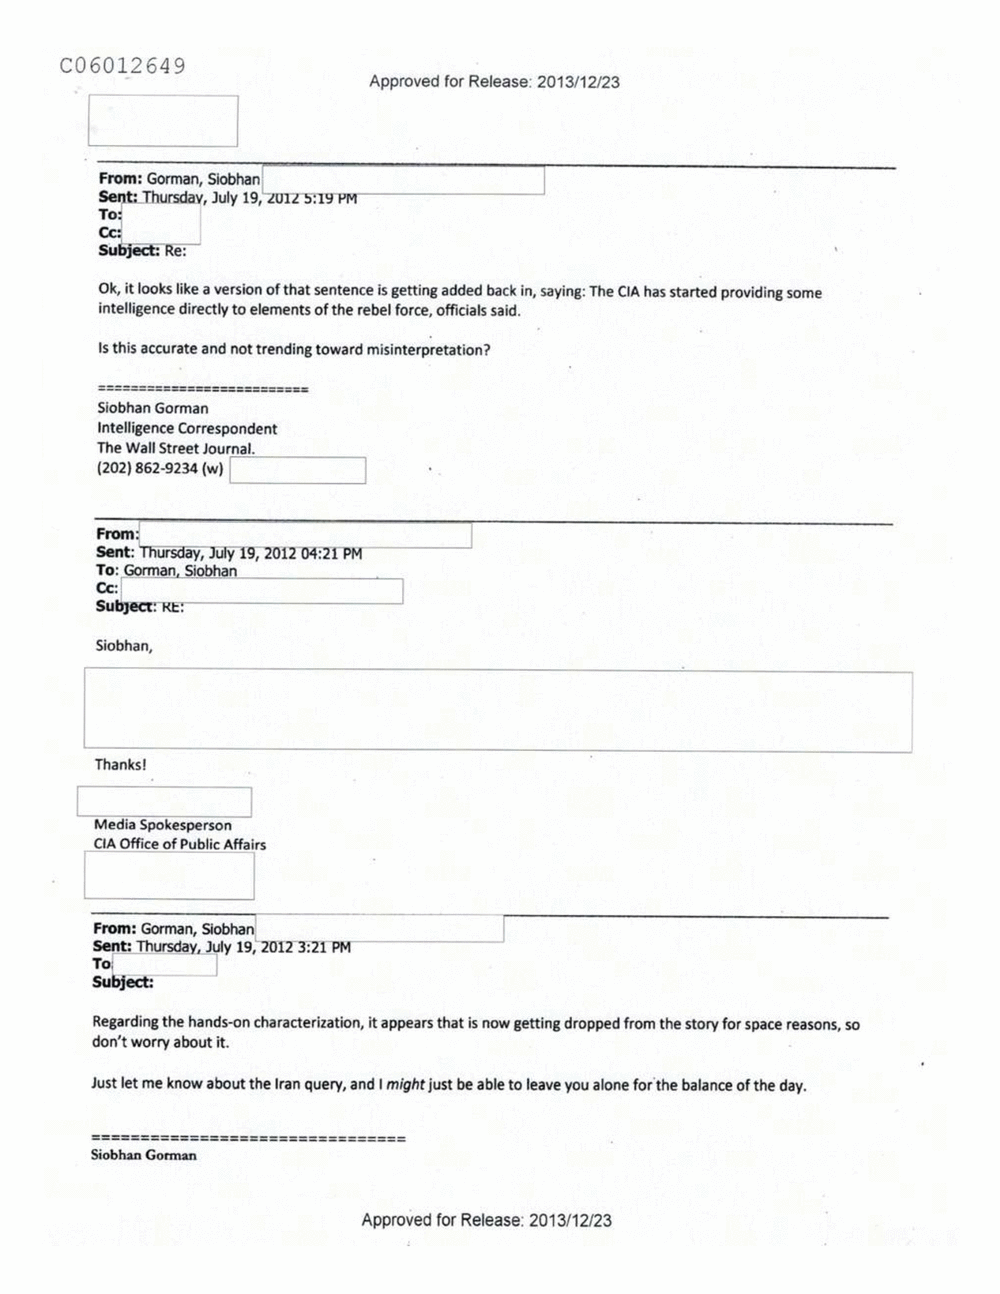 Page 222 from Email Correspondence Between Reporters and CIA Flacks